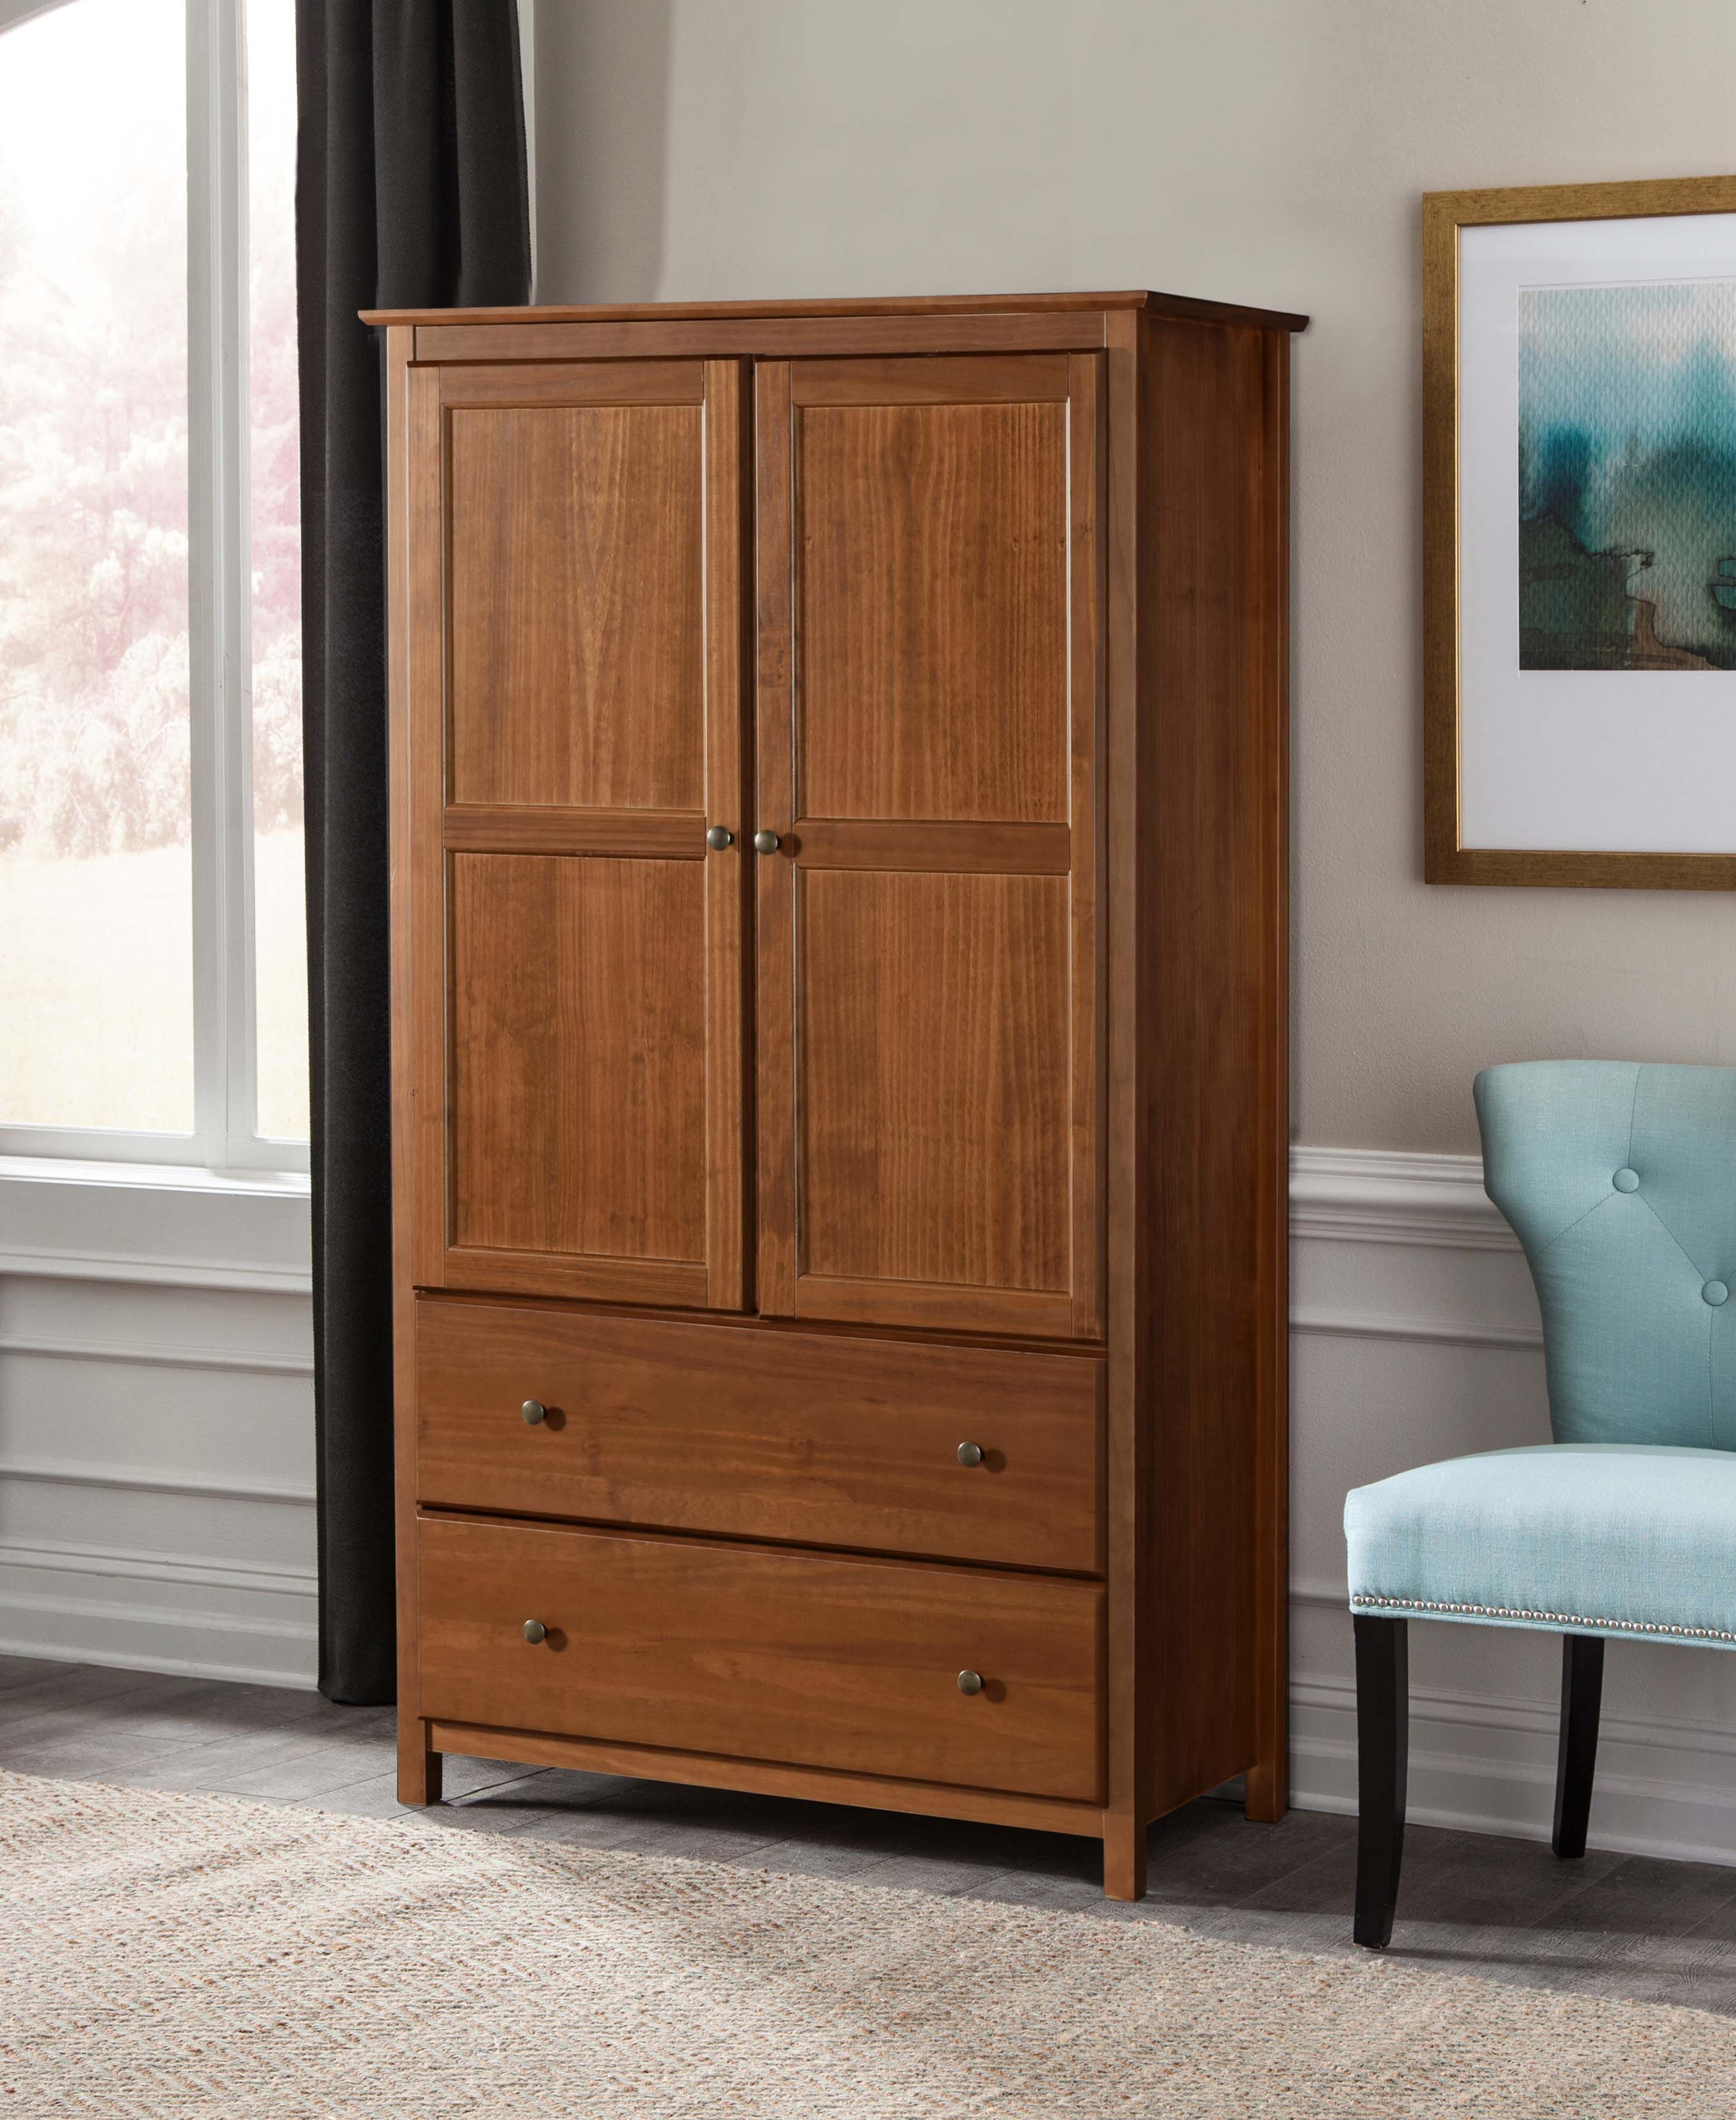 Grain Wood Furniture Shaker Solid Wood Armoire & Reviews | Wayfair For Pine Wardrobes With Drawers And Shelves (View 13 of 15)